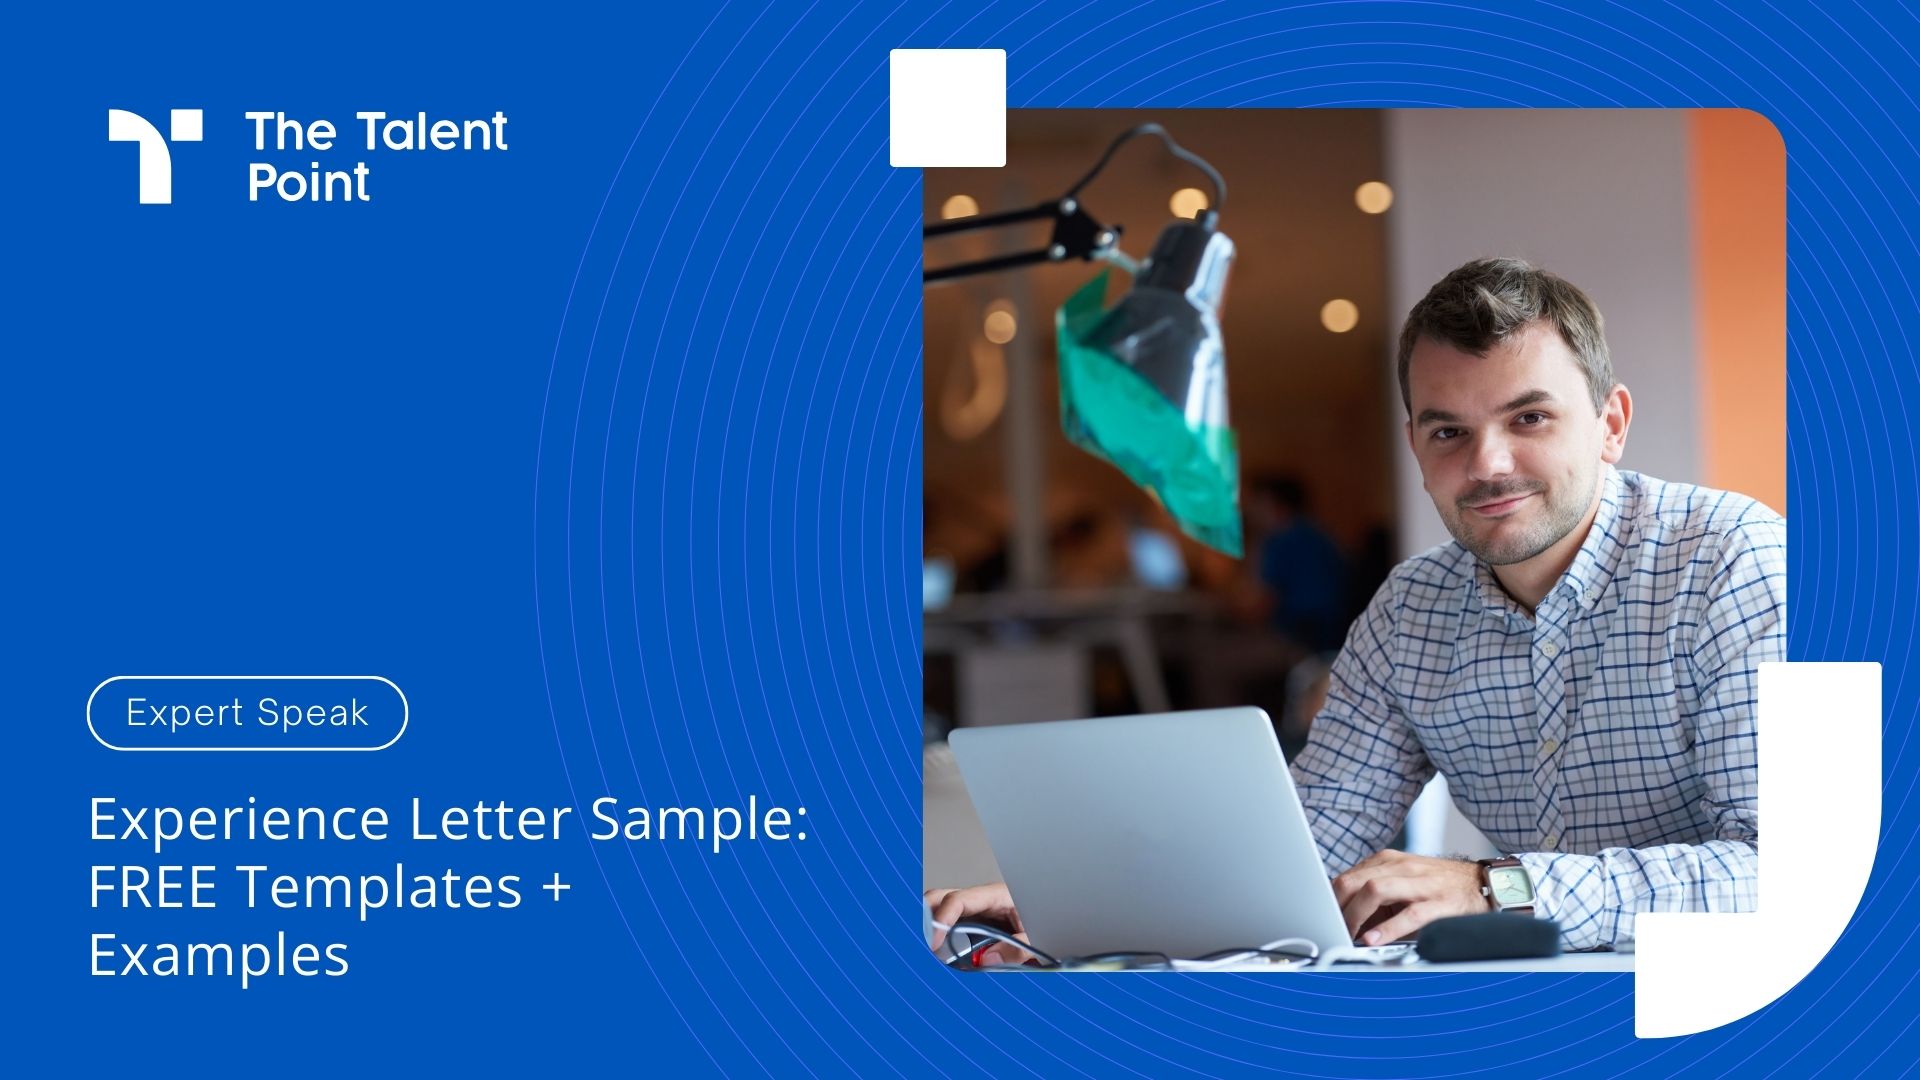 Work Experience Letter Samples  by Employer  - Free Templates to Use